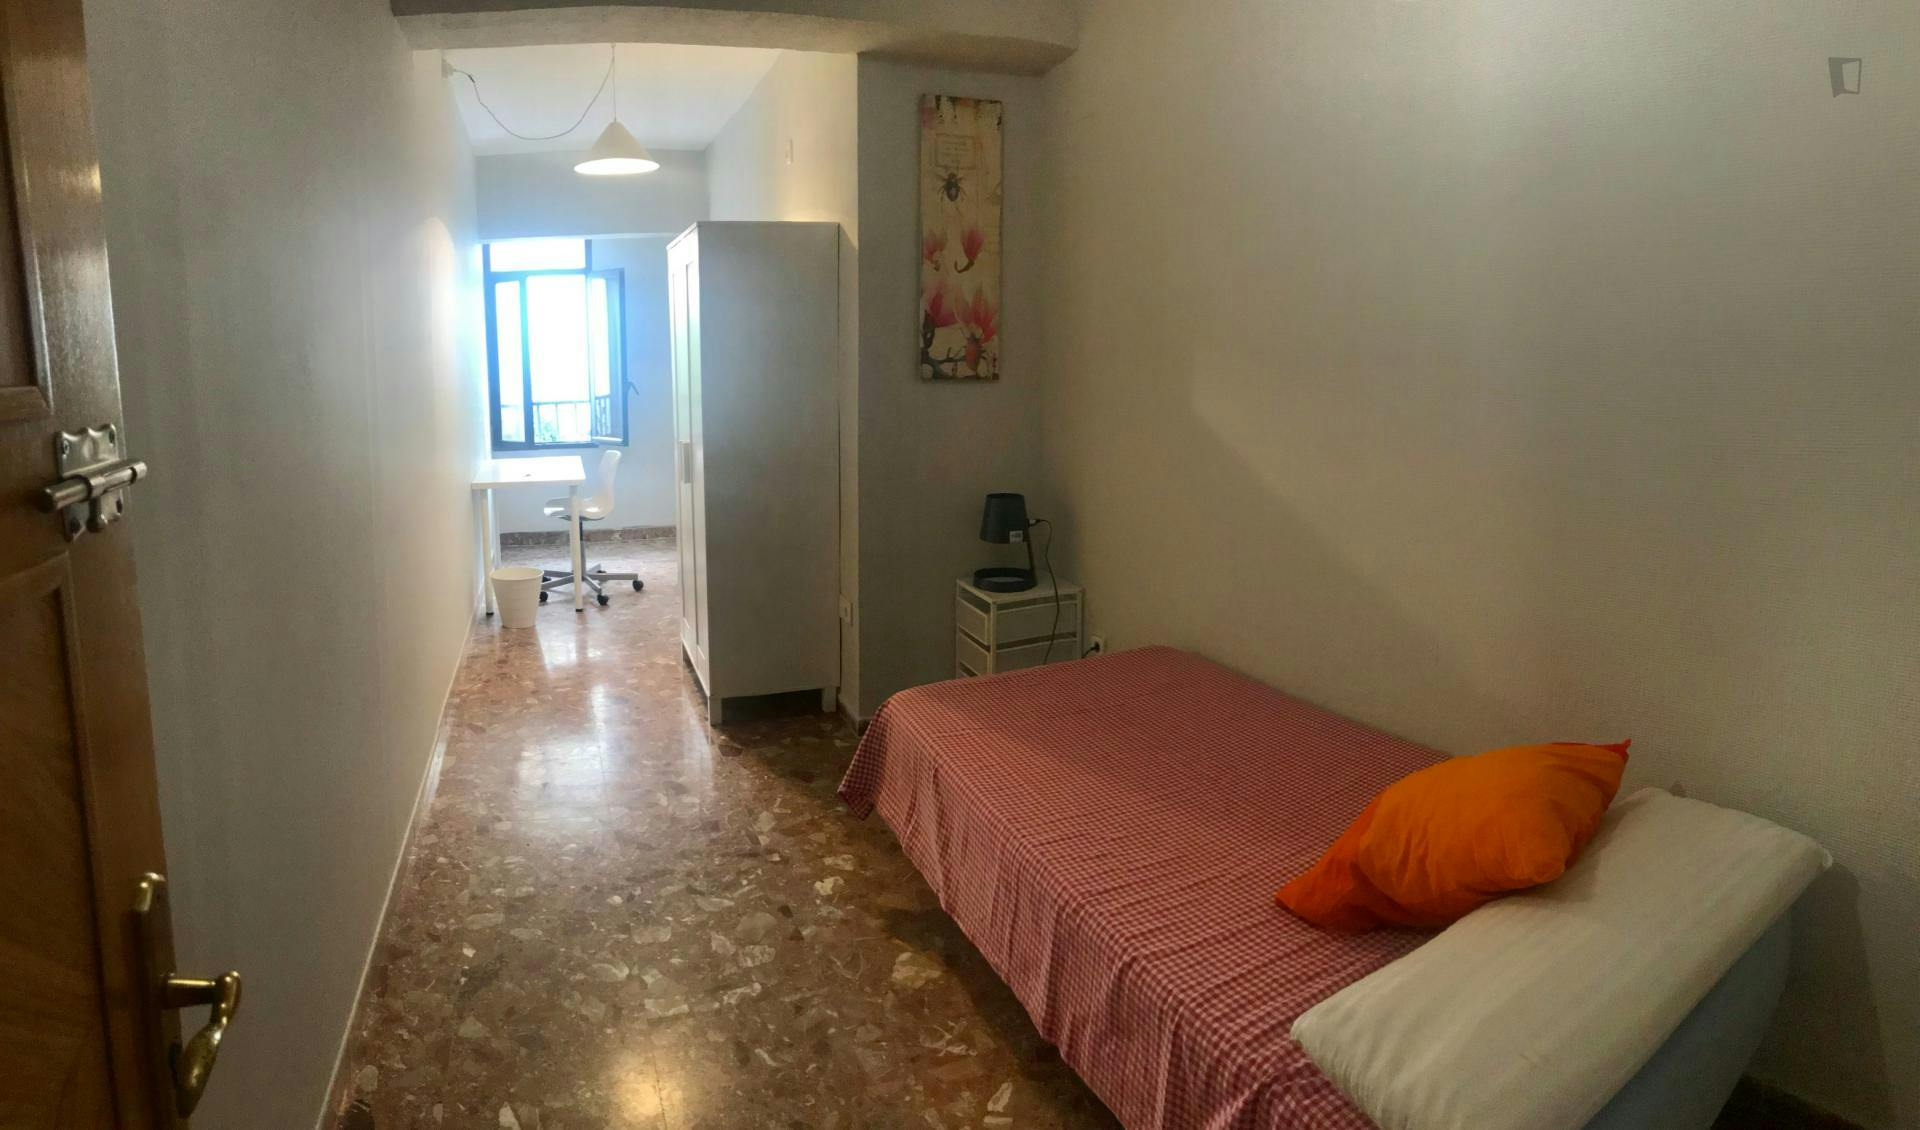 Pleasant single bedroom in a student flat, close to the Museo Arqueológico